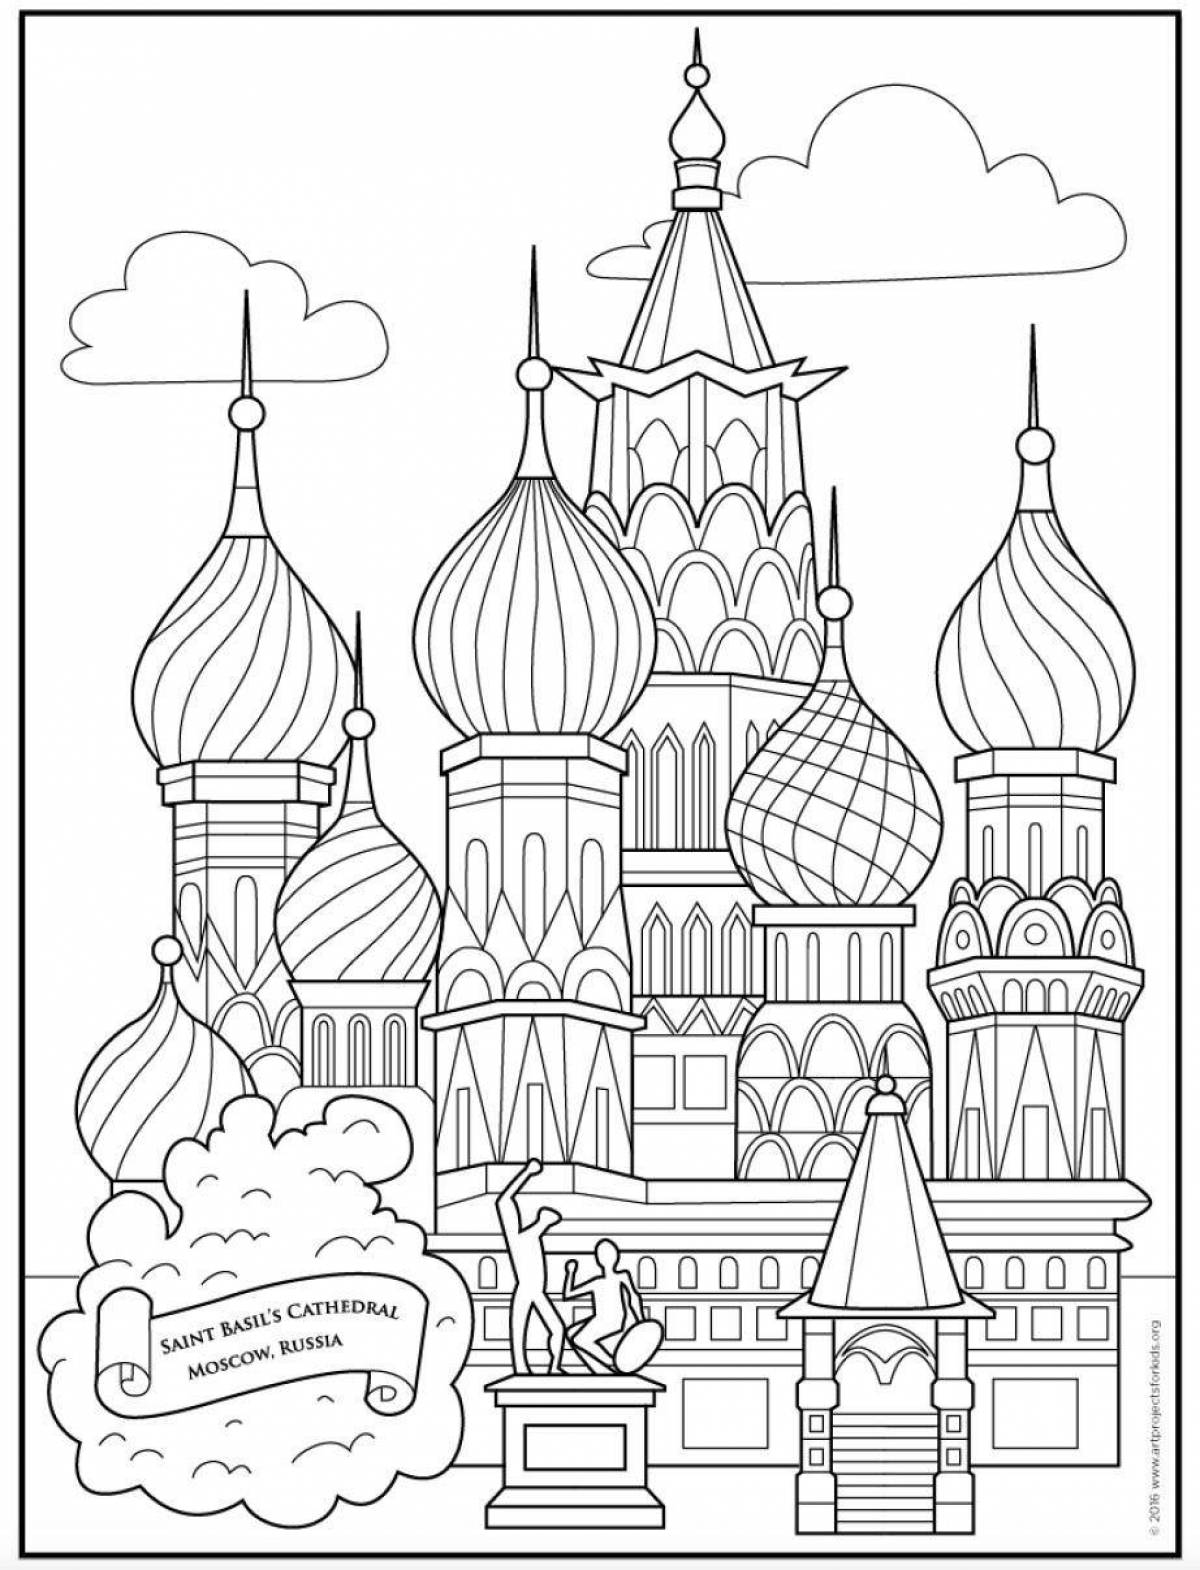 Coloring page glorious moscow red square